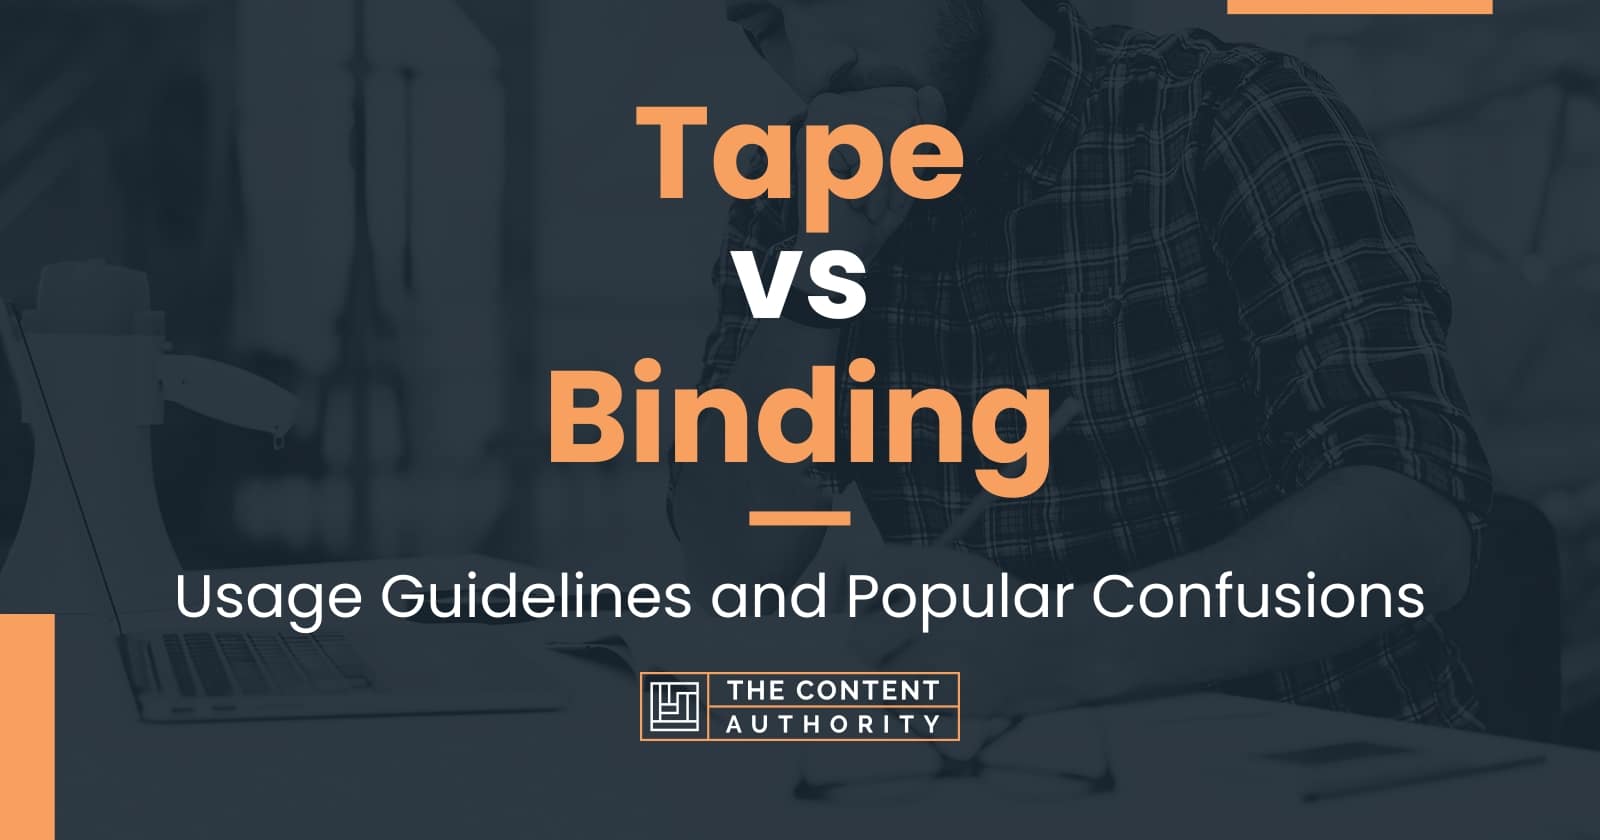 Tape vs Binding: Usage Guidelines and Popular Confusions